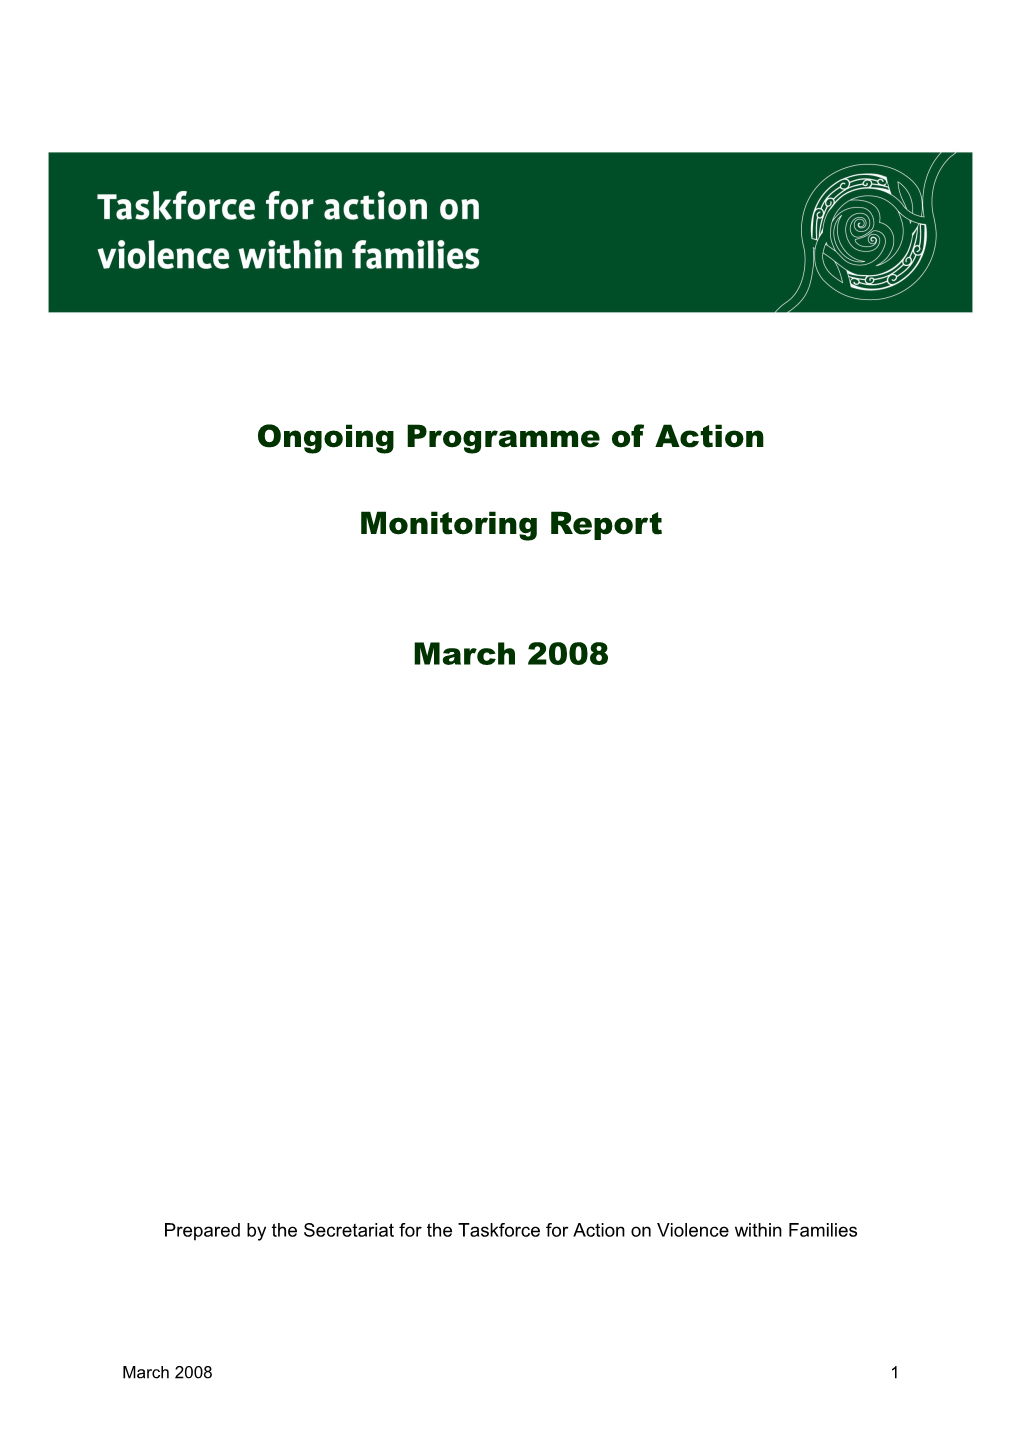 Ongoing Programme of Action